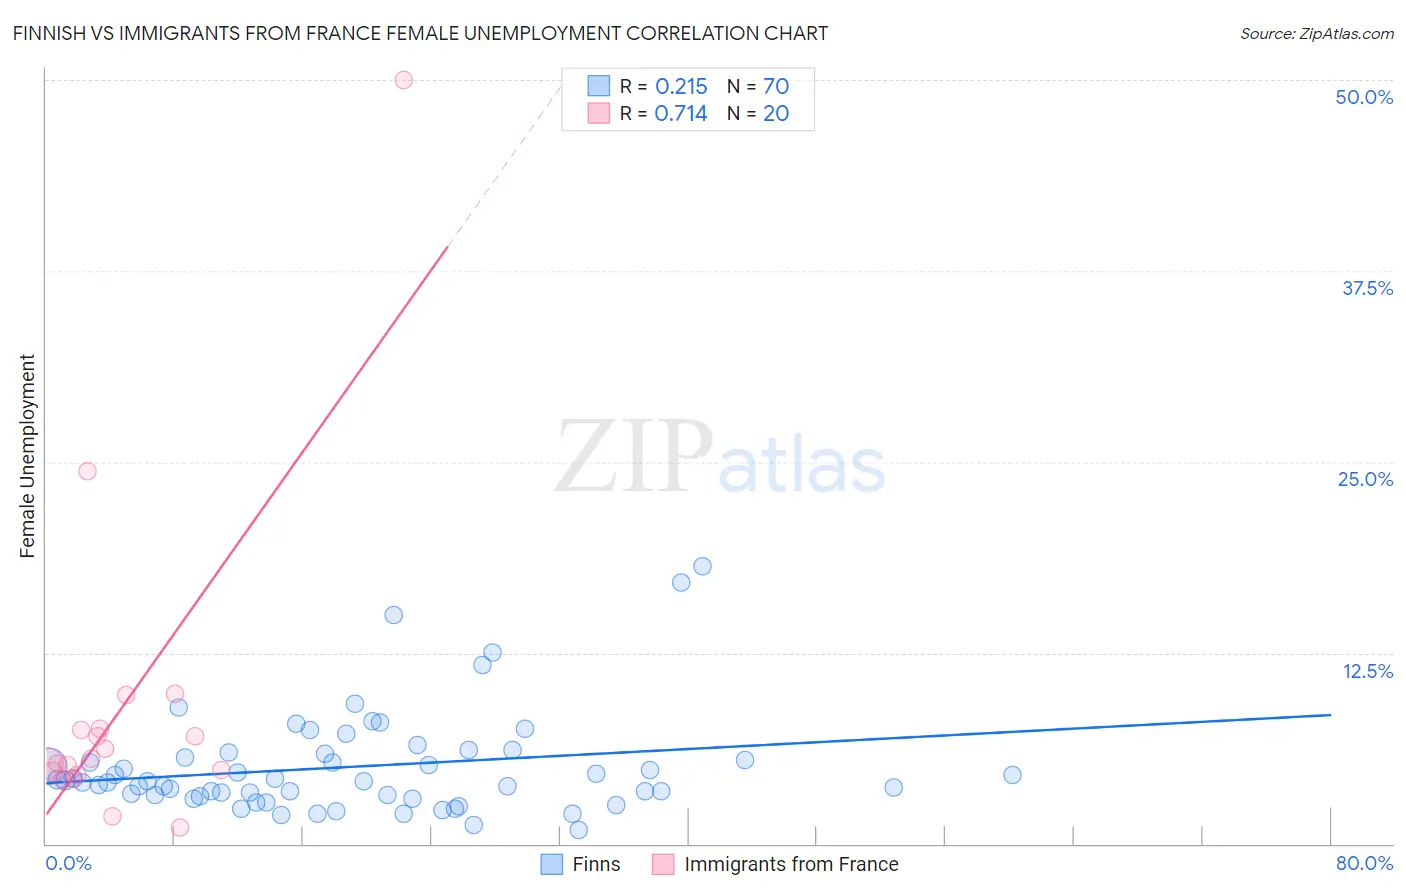 Finnish vs Immigrants from France Female Unemployment